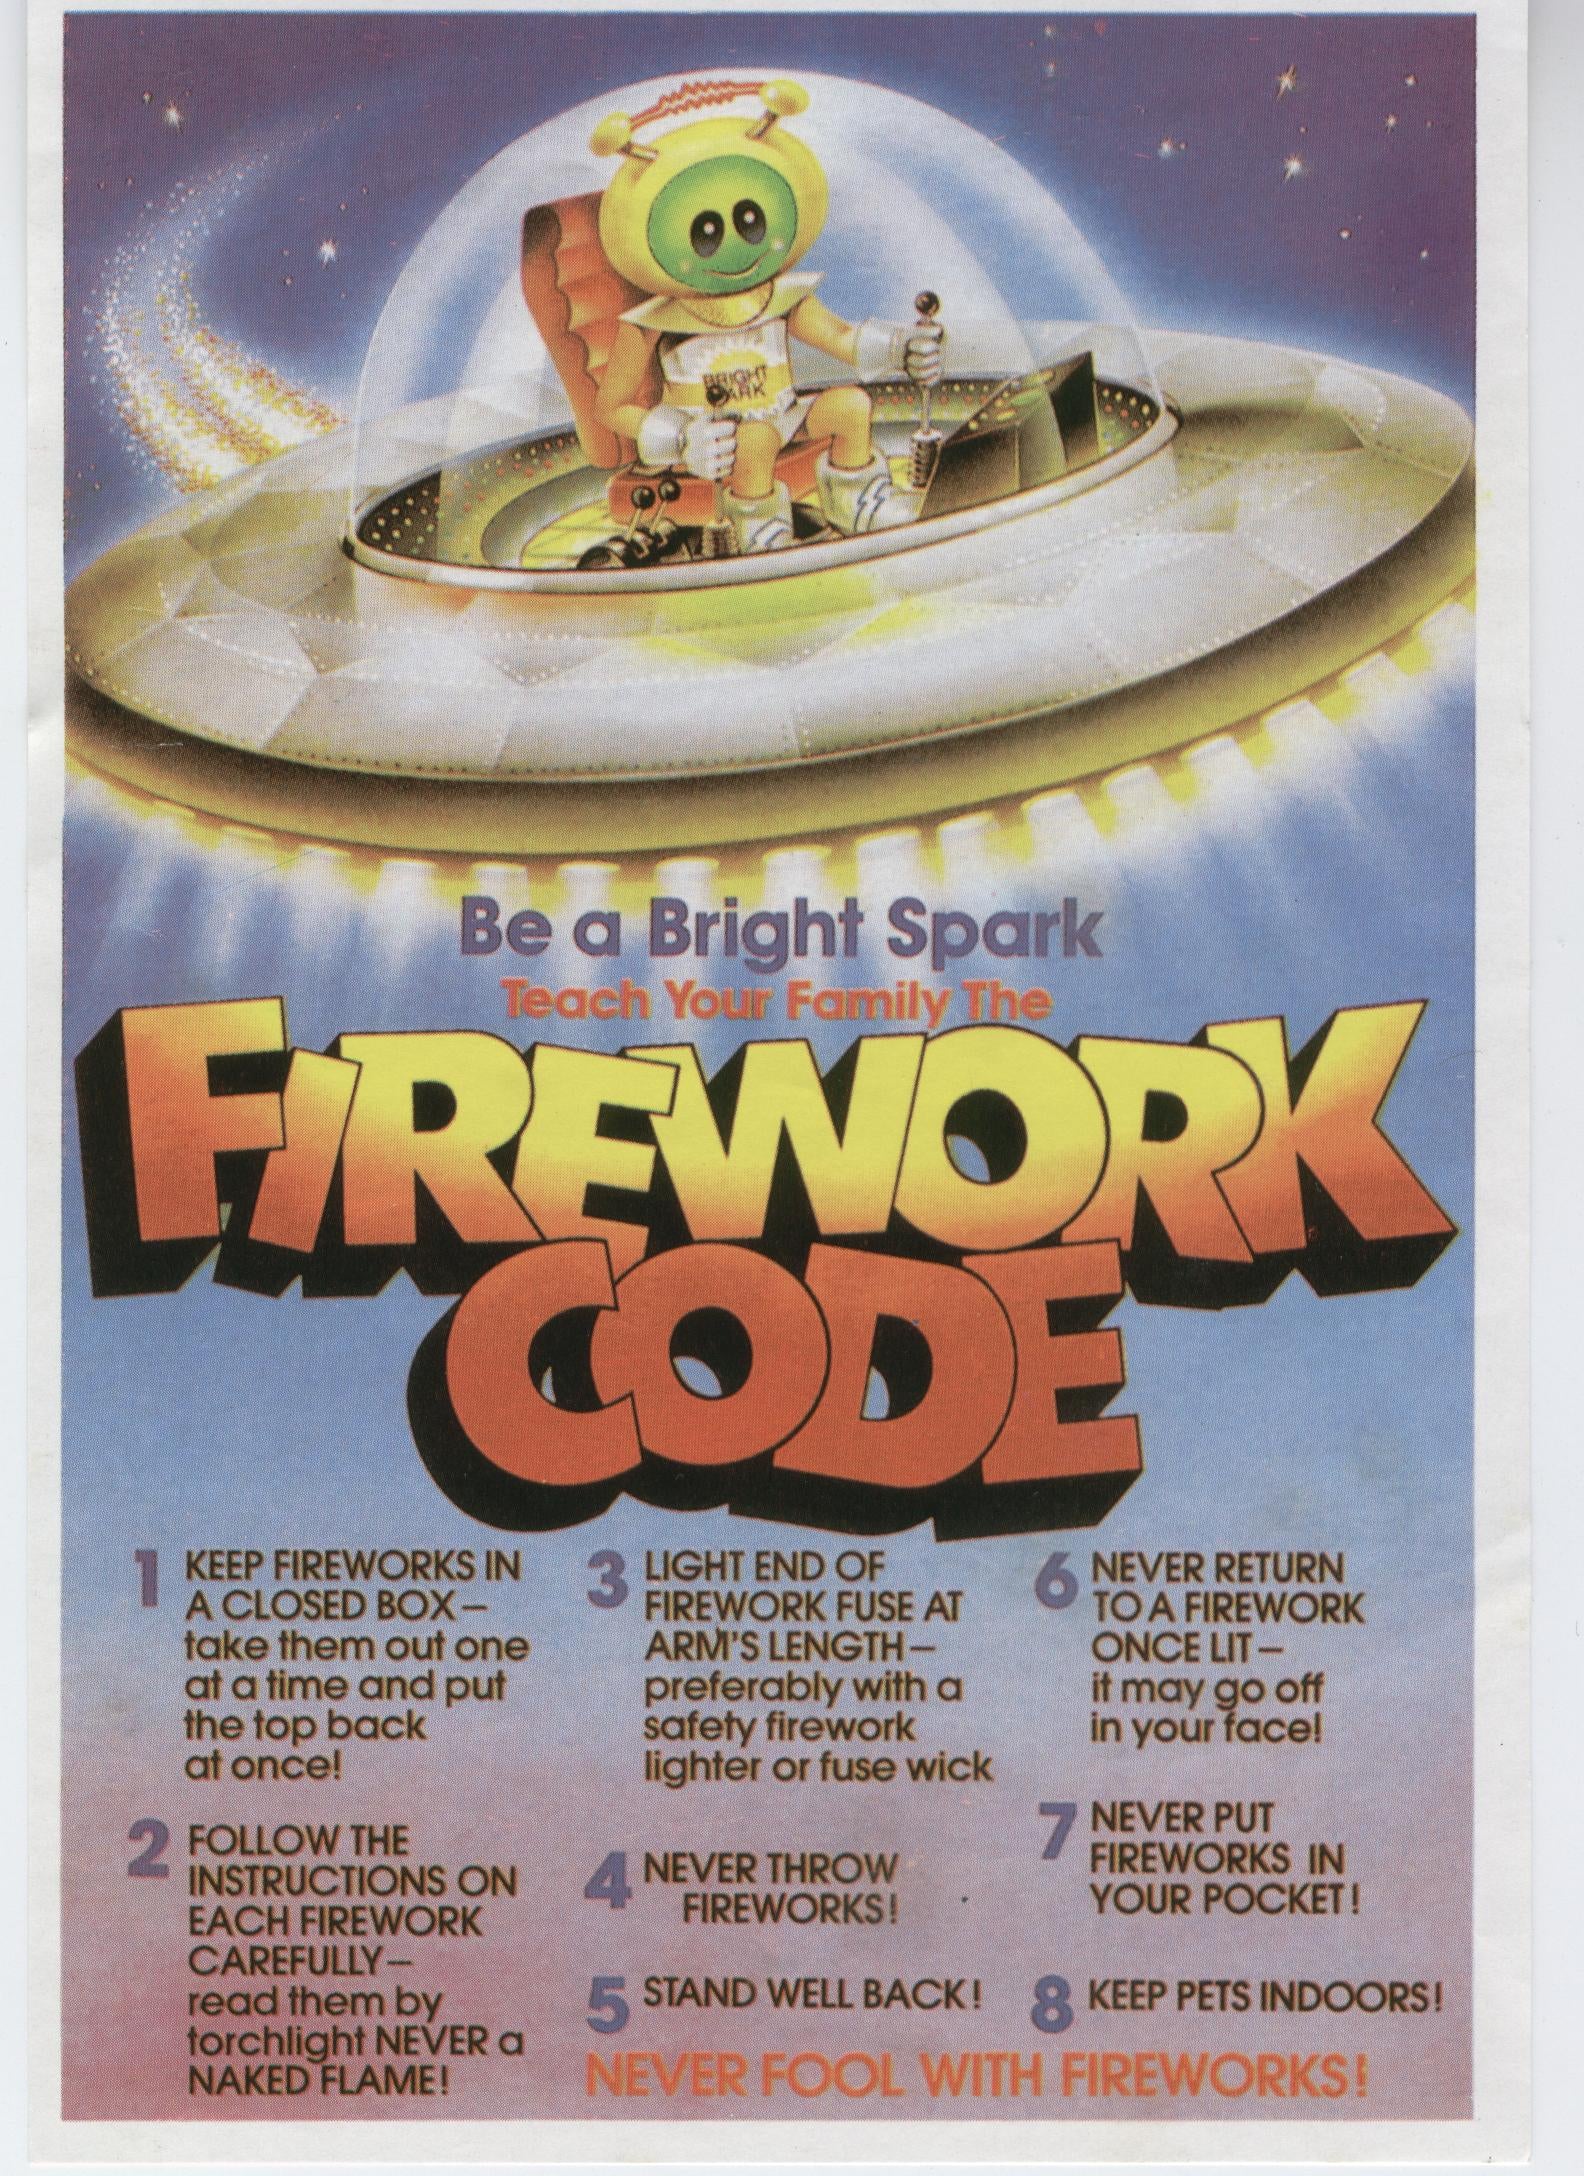 Fireworks Poster - The law...